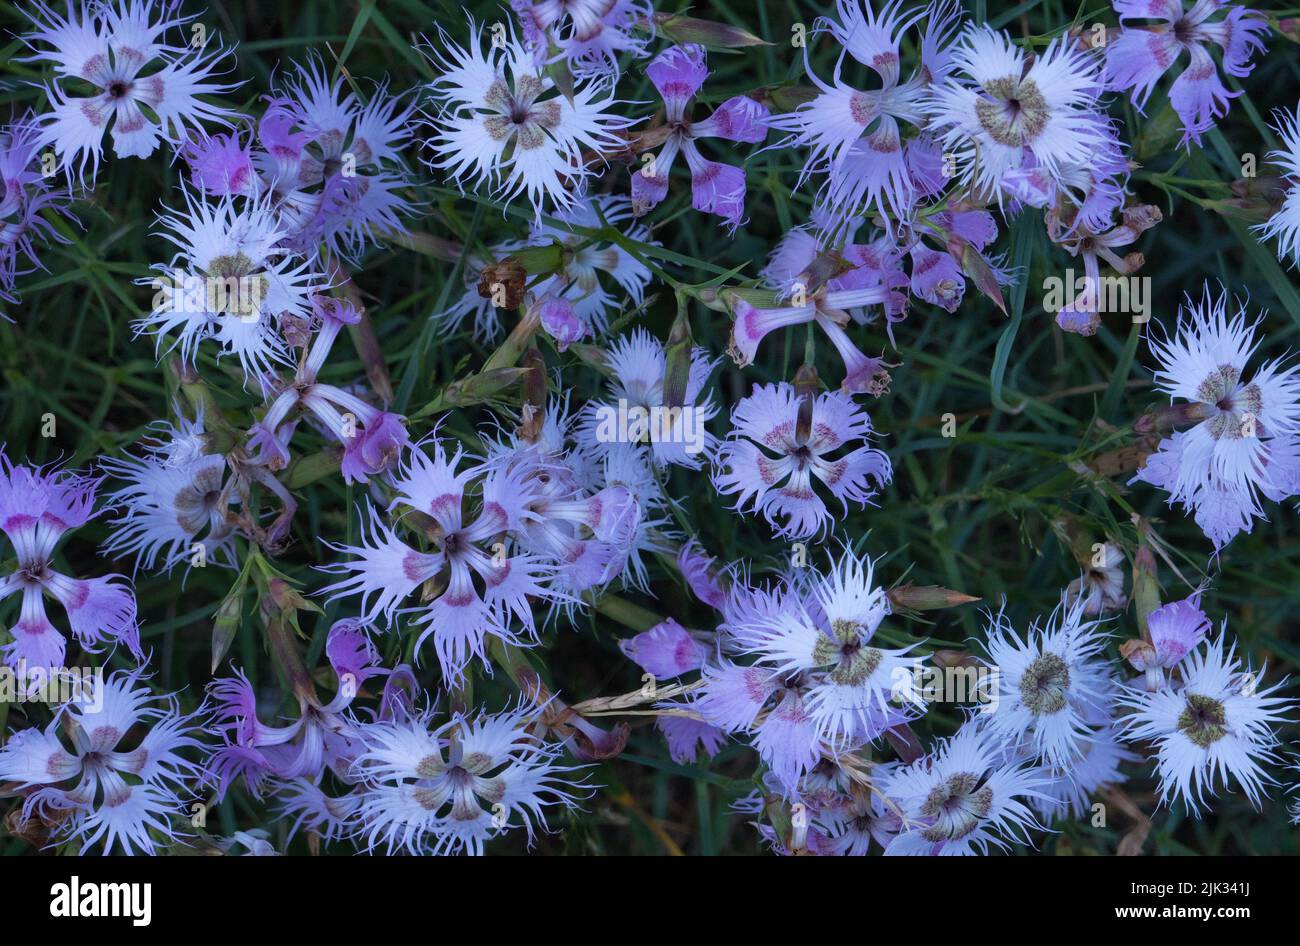 Wildflowers, Fringed Pink, lavender to white colored, with deeply cut fringed petals Stock Photo